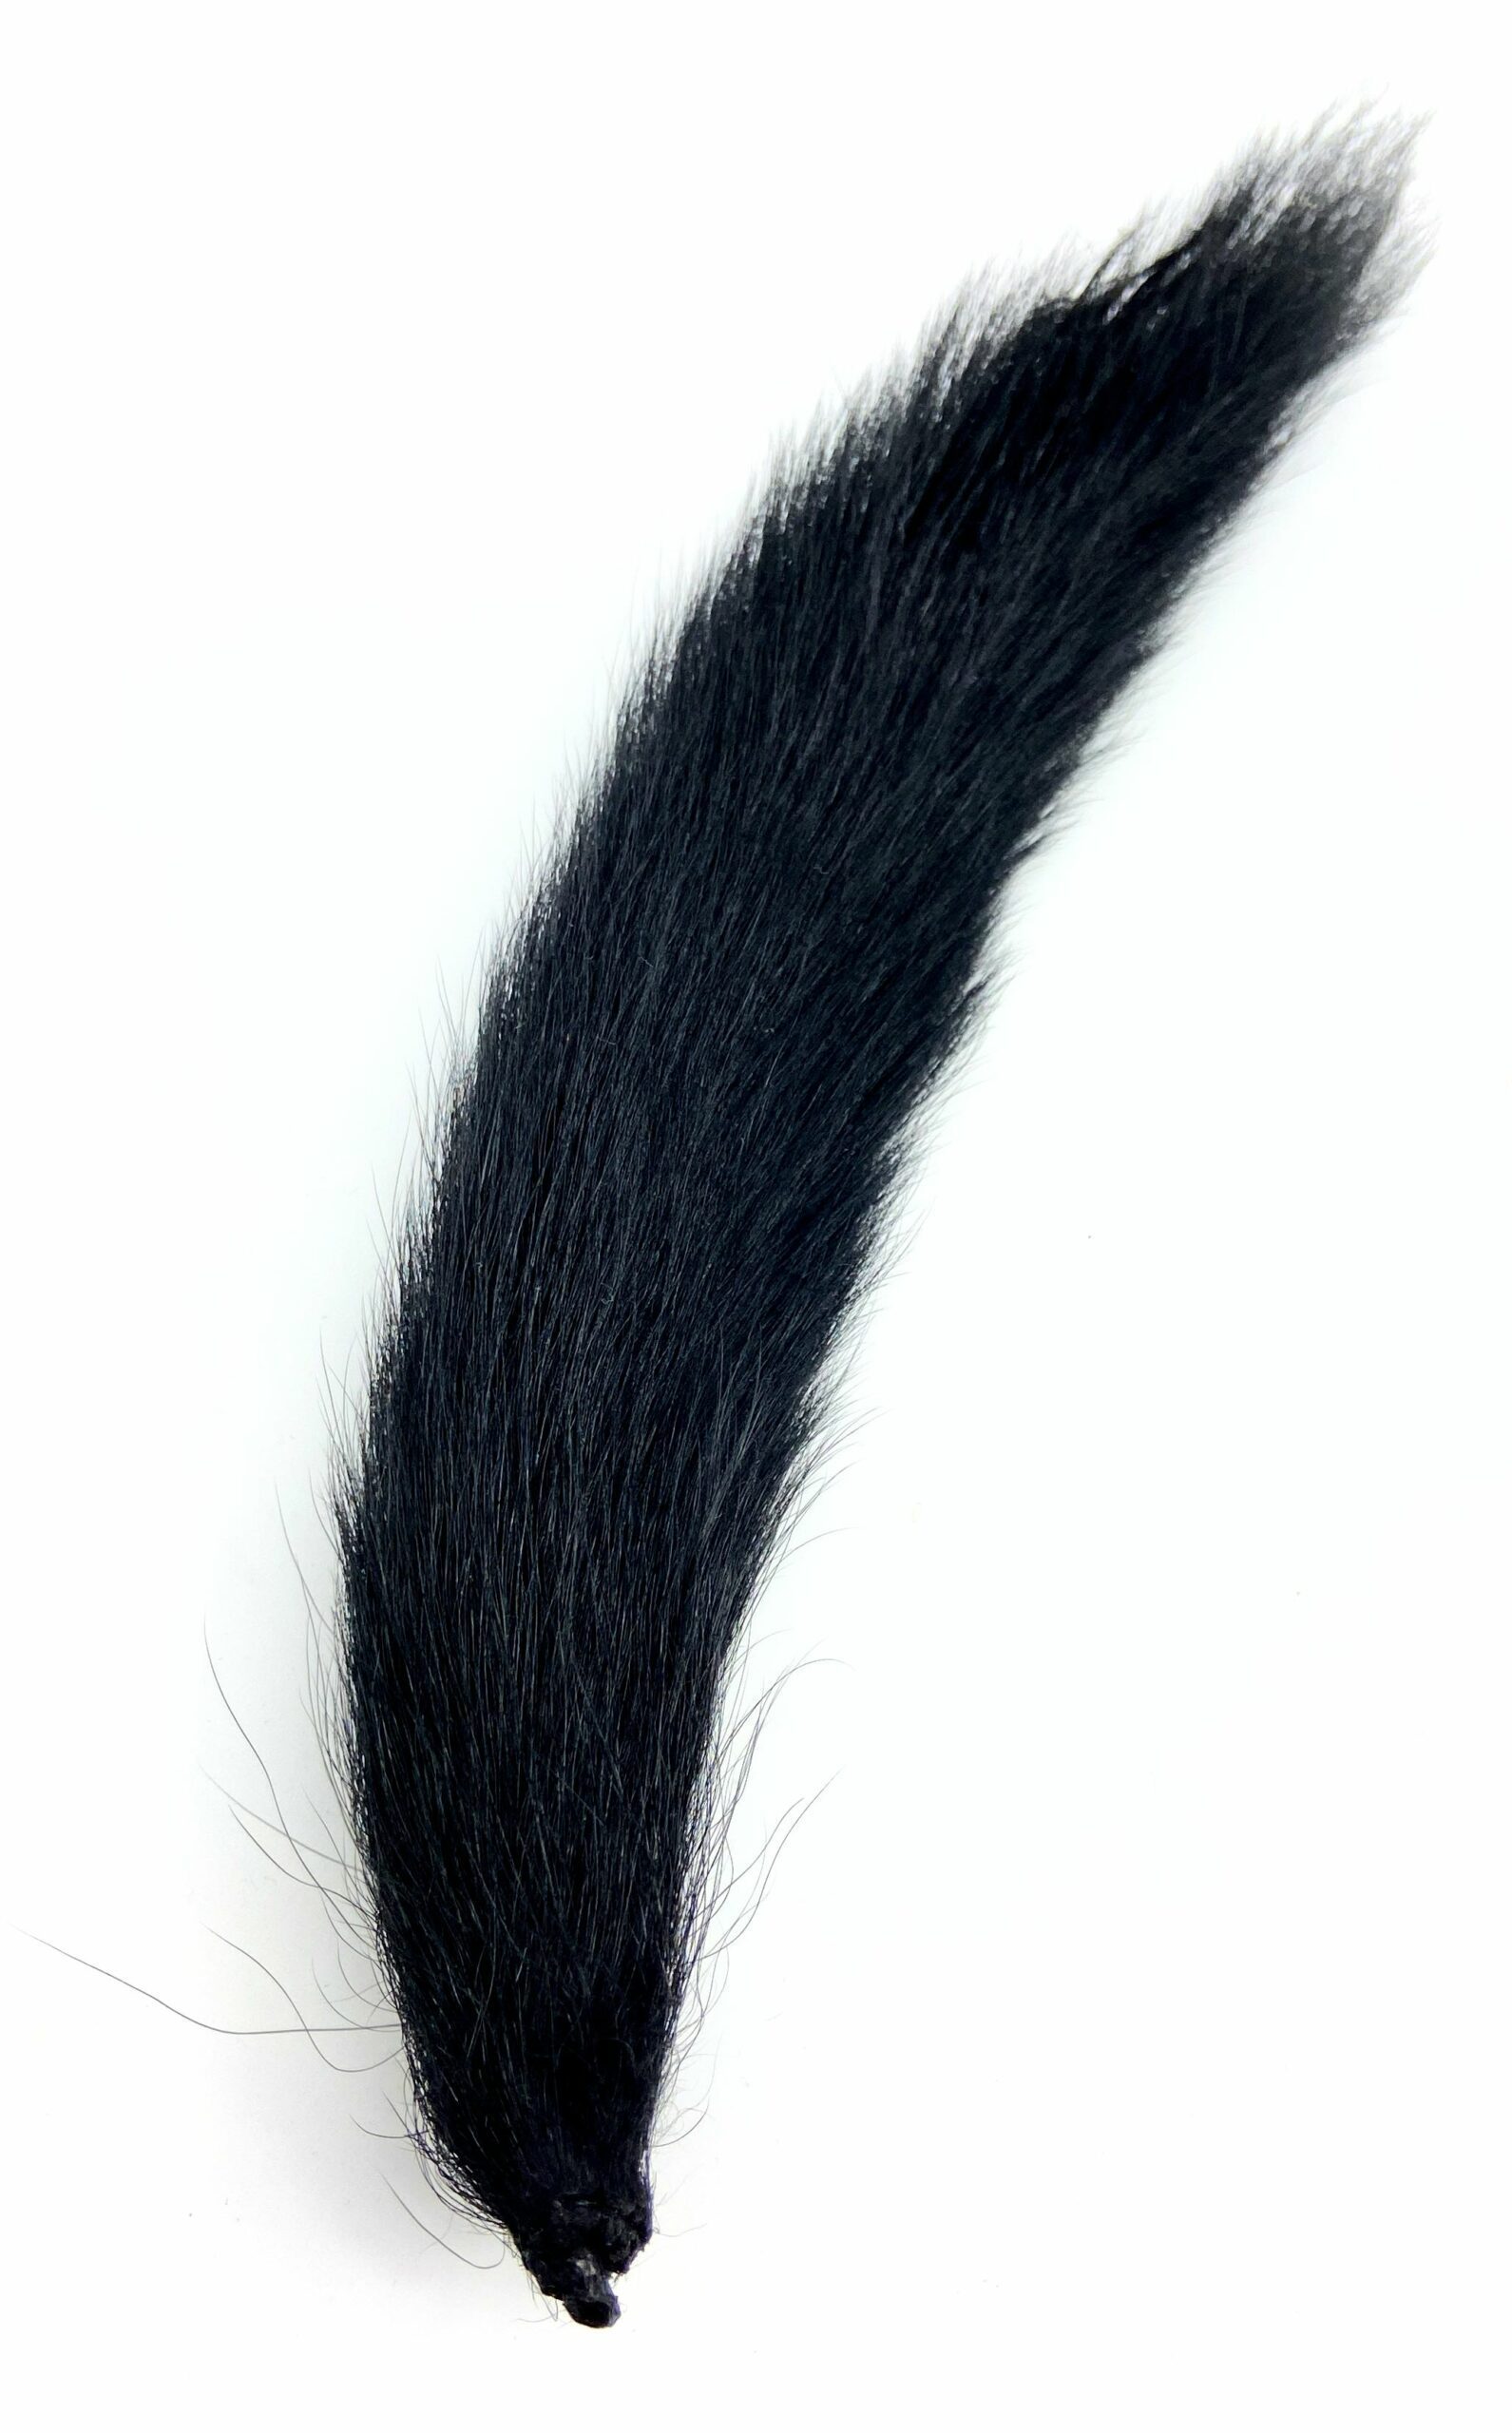 Dyed black squirrel tail